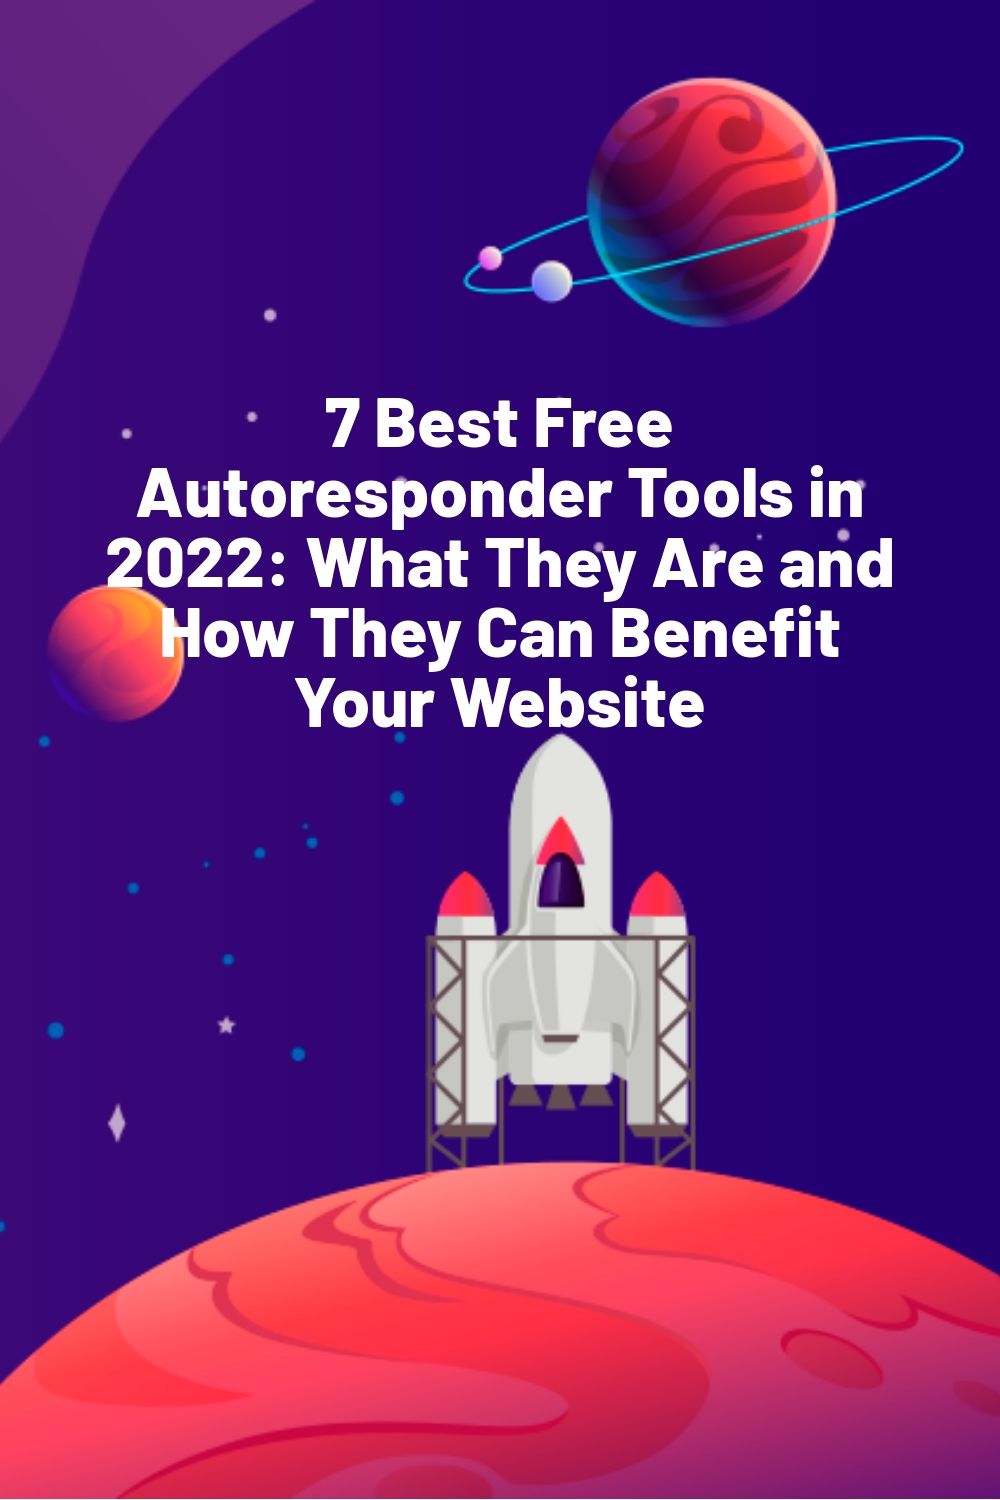 7 Best Free Autoresponder Tools in 2022: What They Are and How They Can Benefit Your Website